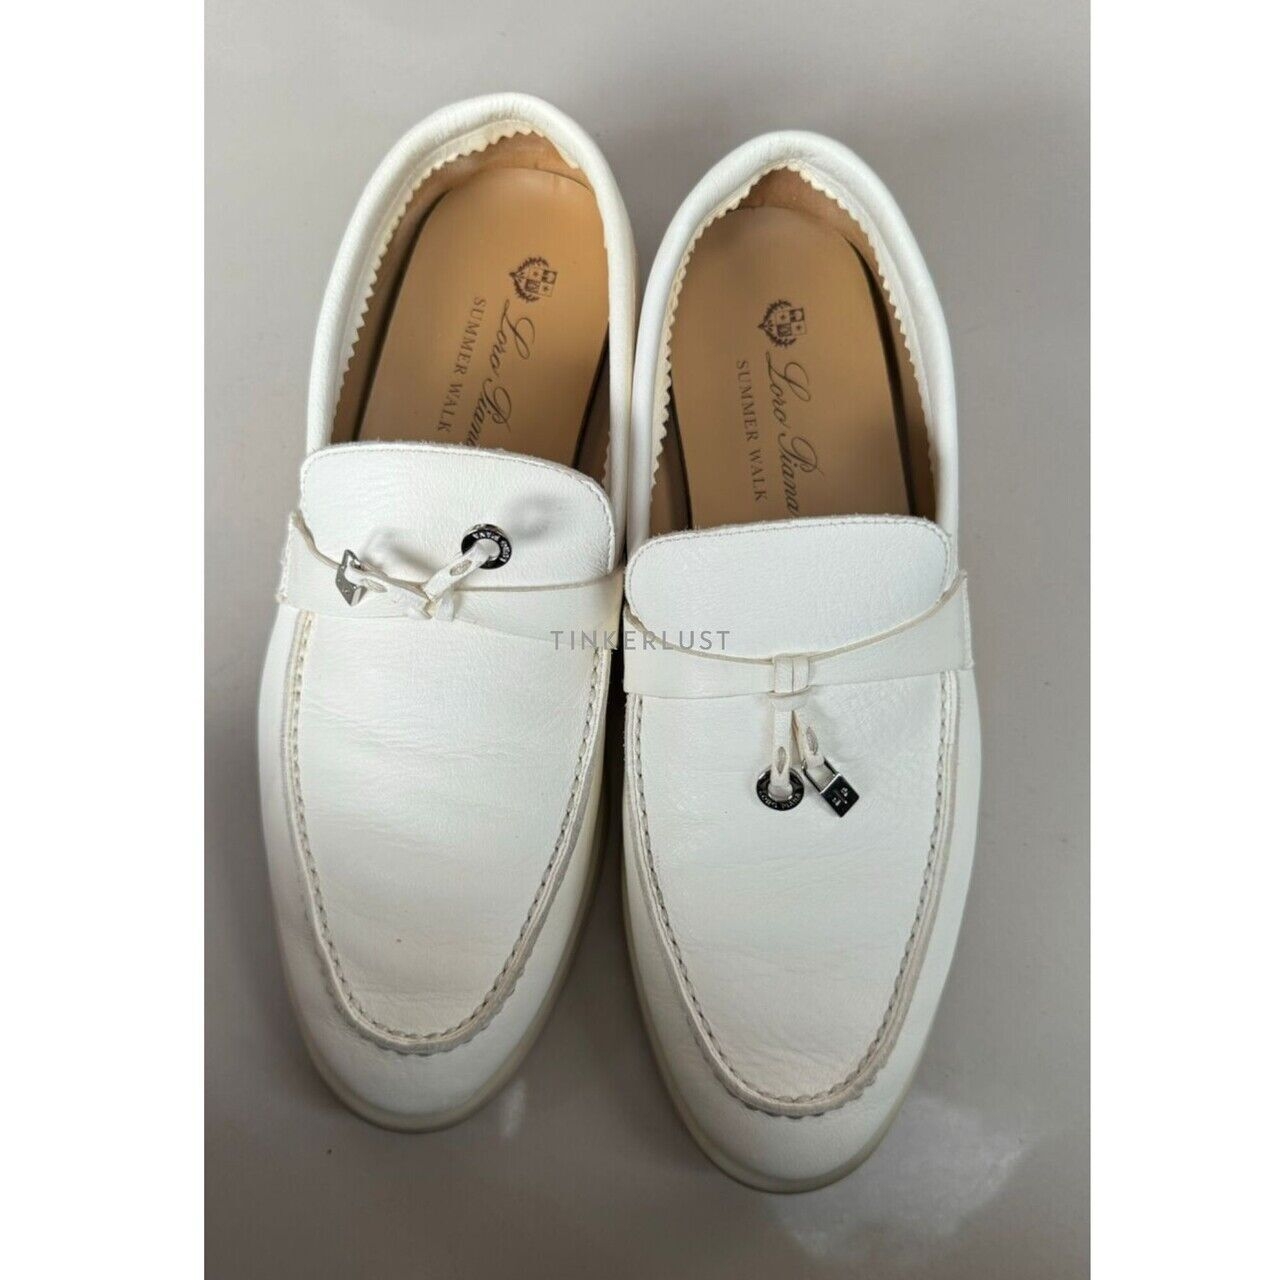 Loro Piana Summer Charms Walk Leather Loafers